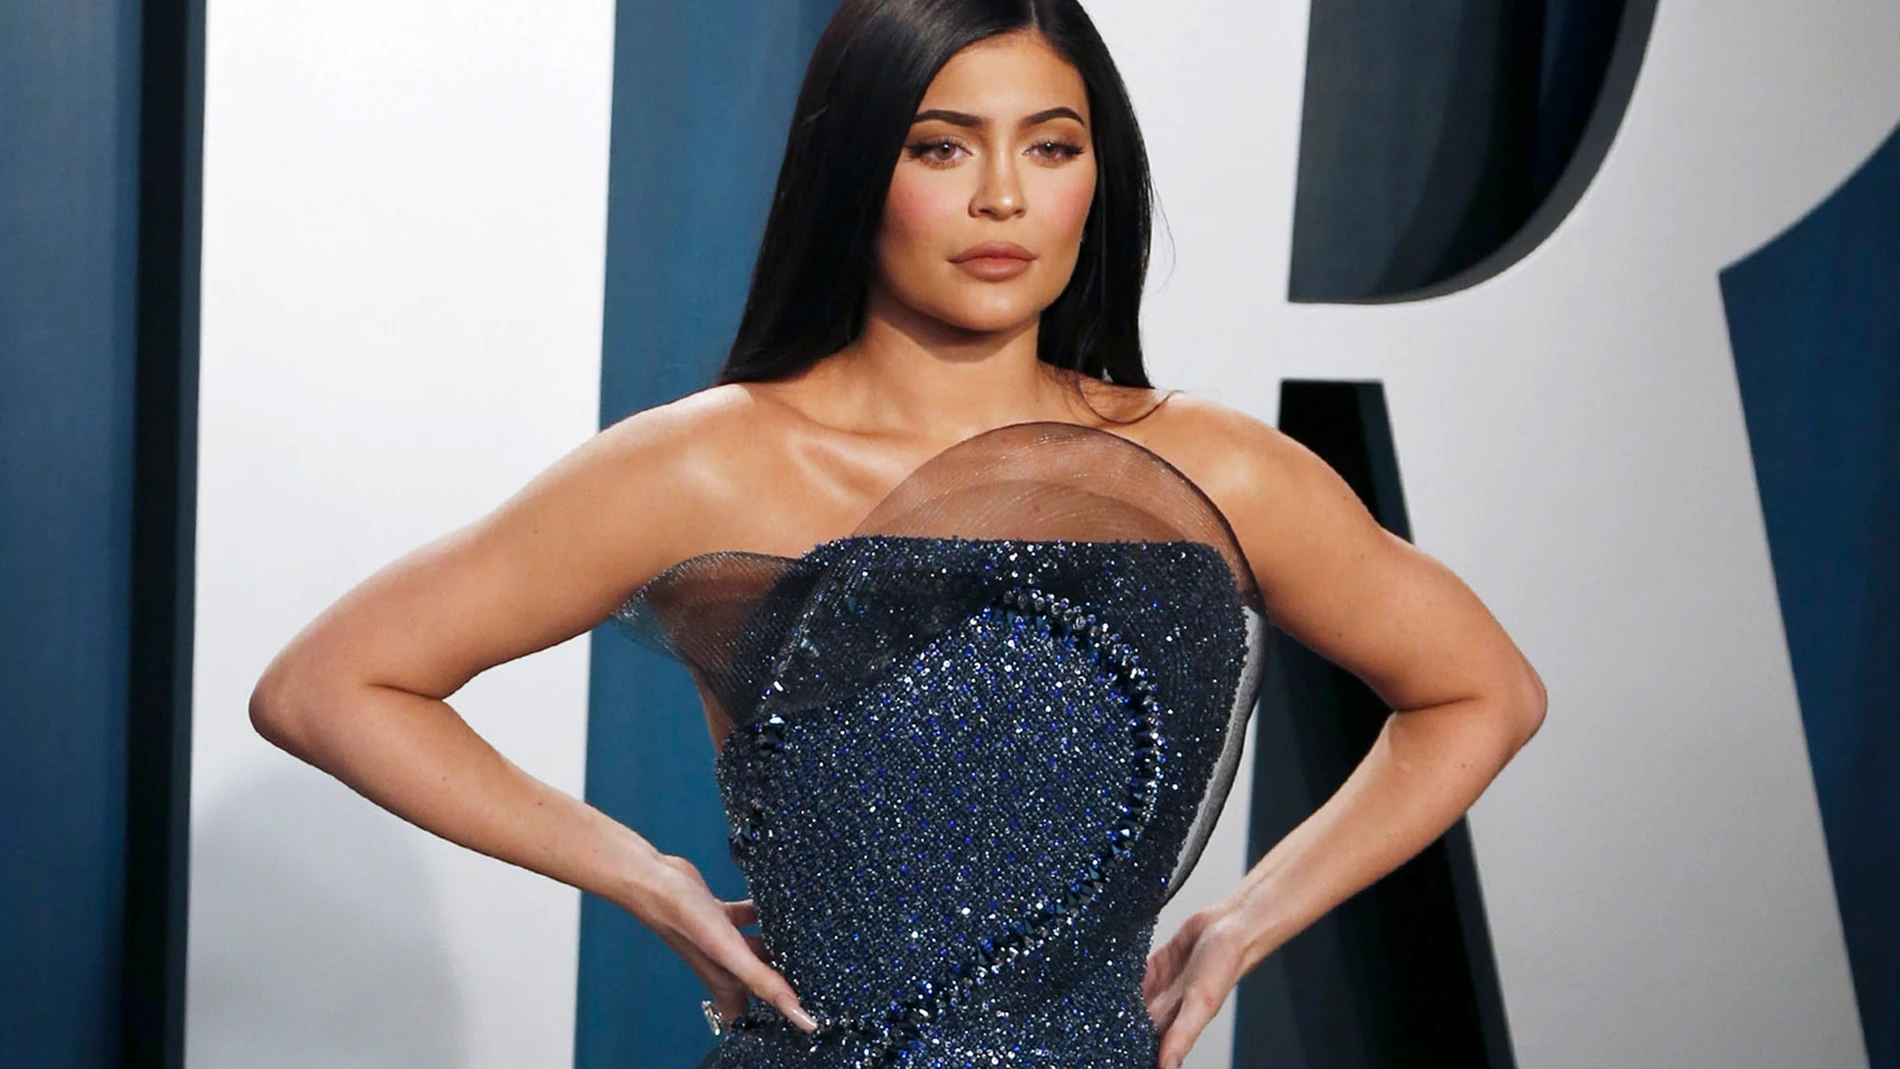 Forbes magazine says Kylie Jenner not a billionaire